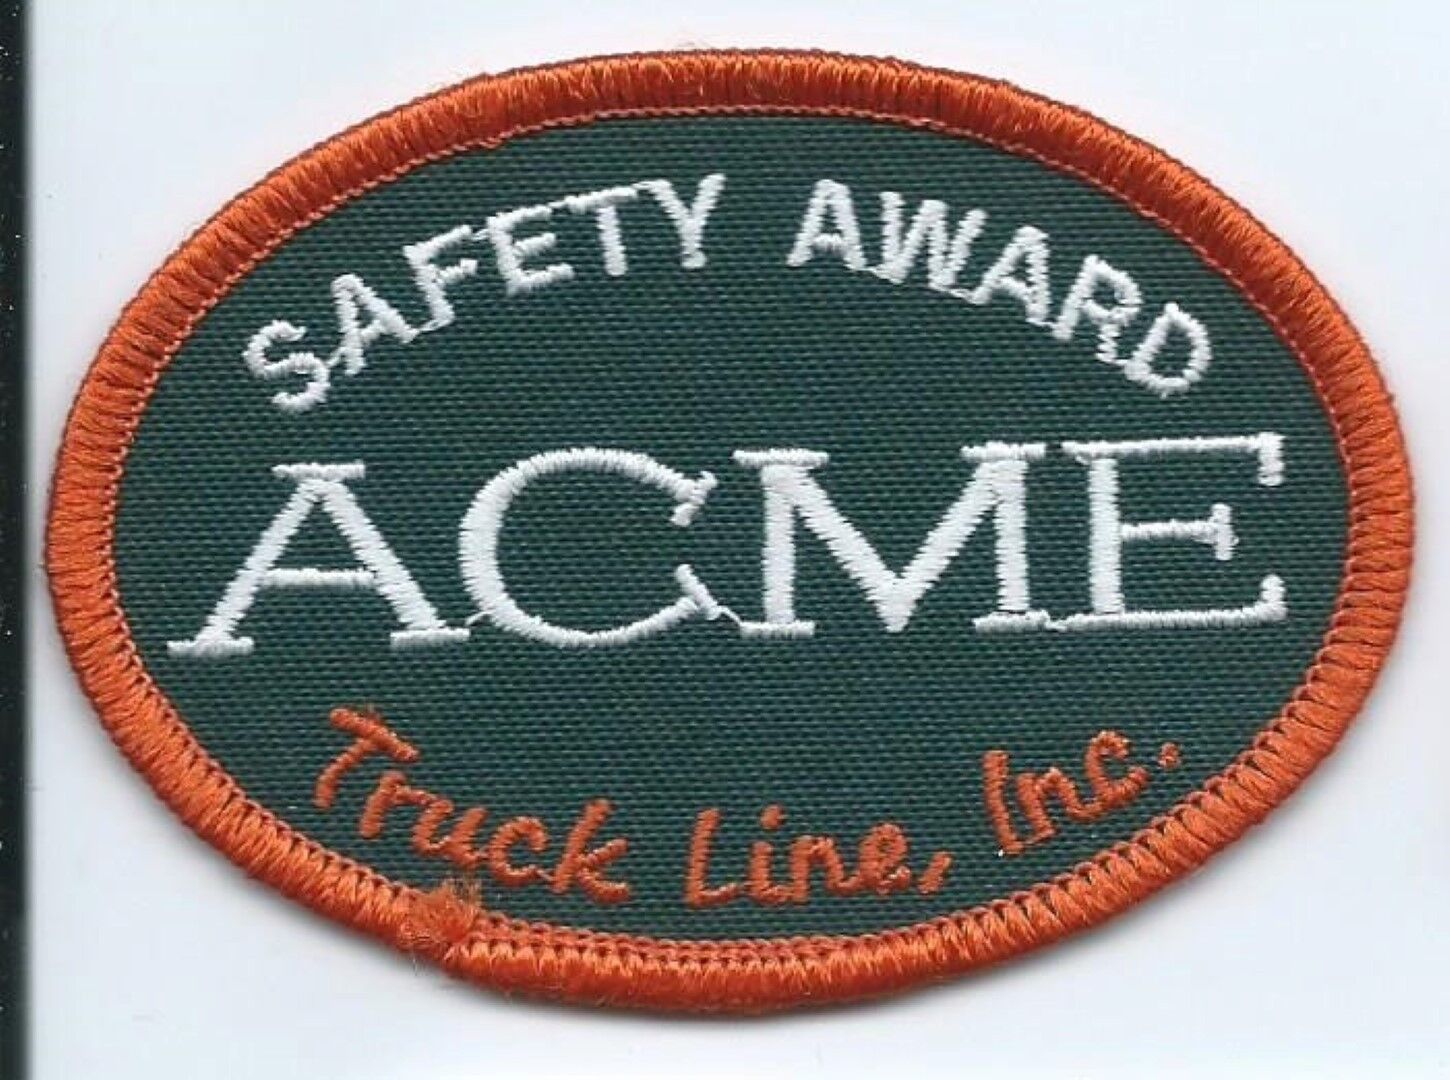 Acme truck Line safety award driver patch 2-1/4 X 3-1/4 #697 